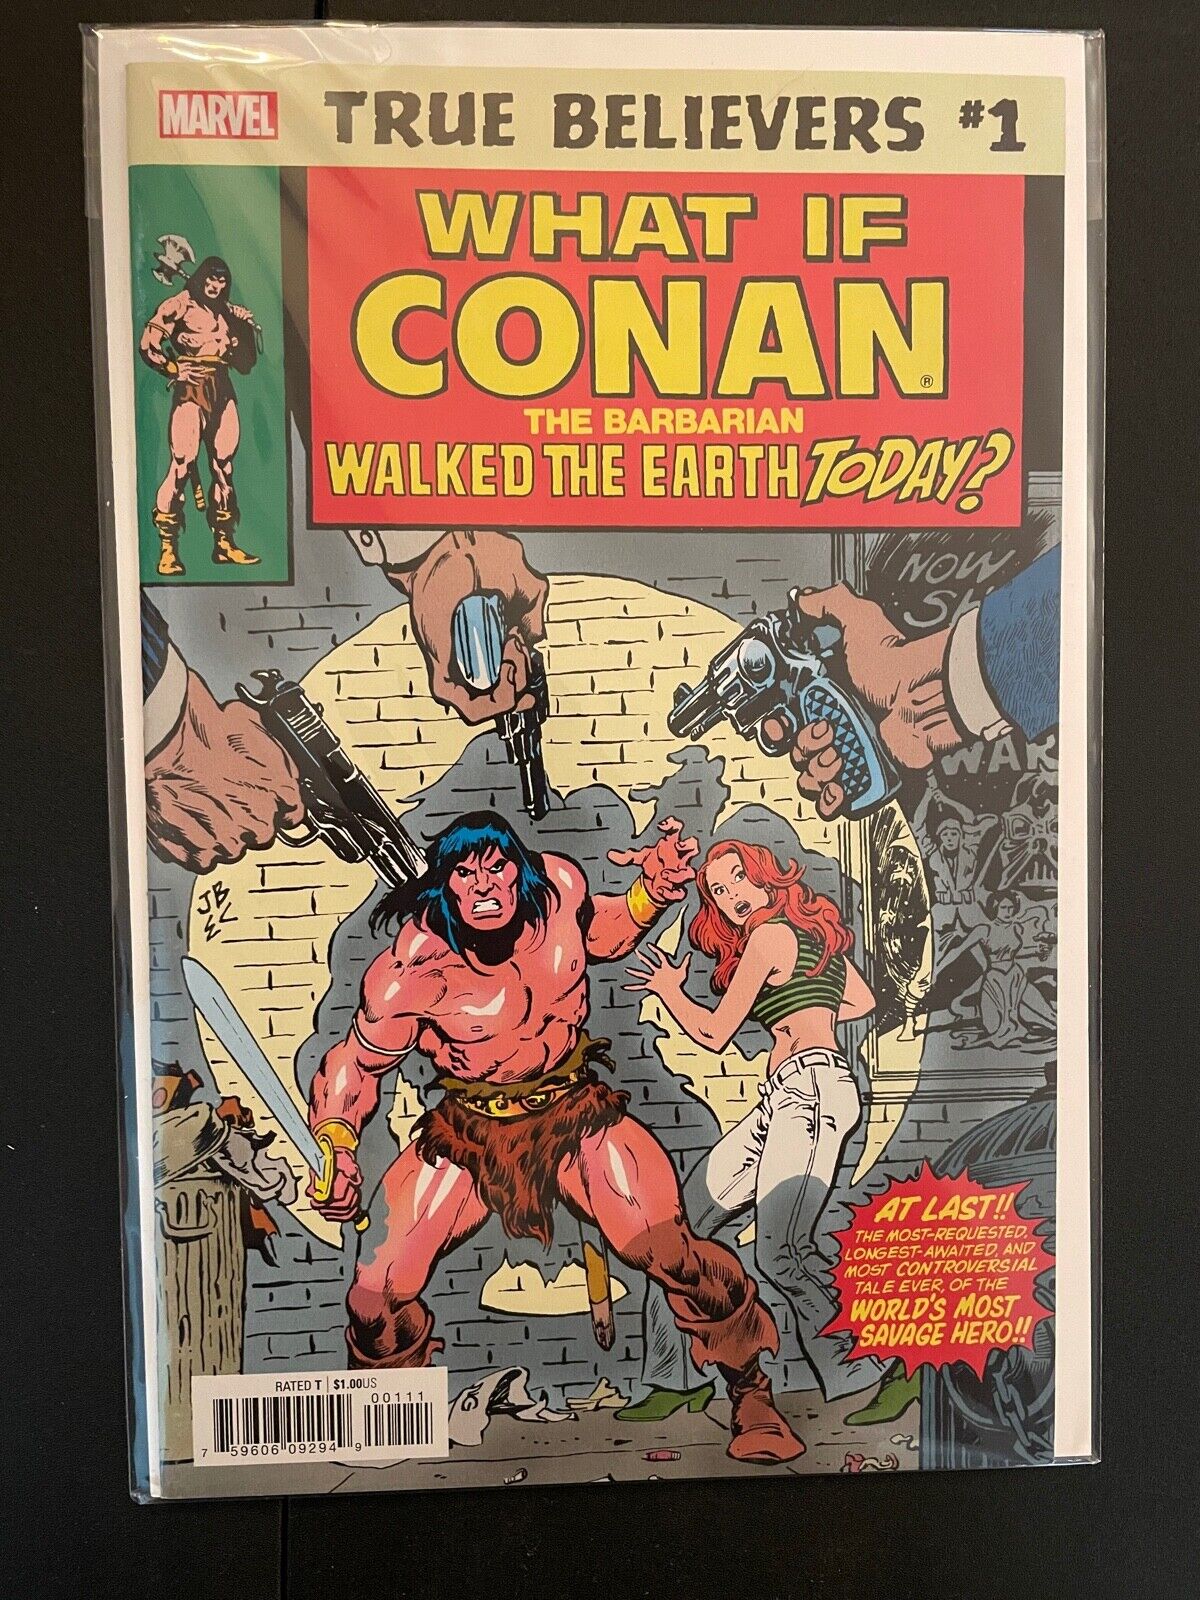 True Believers: What If Conan Walked the Earth Today #1 2019 9.4 Marvel D27-143